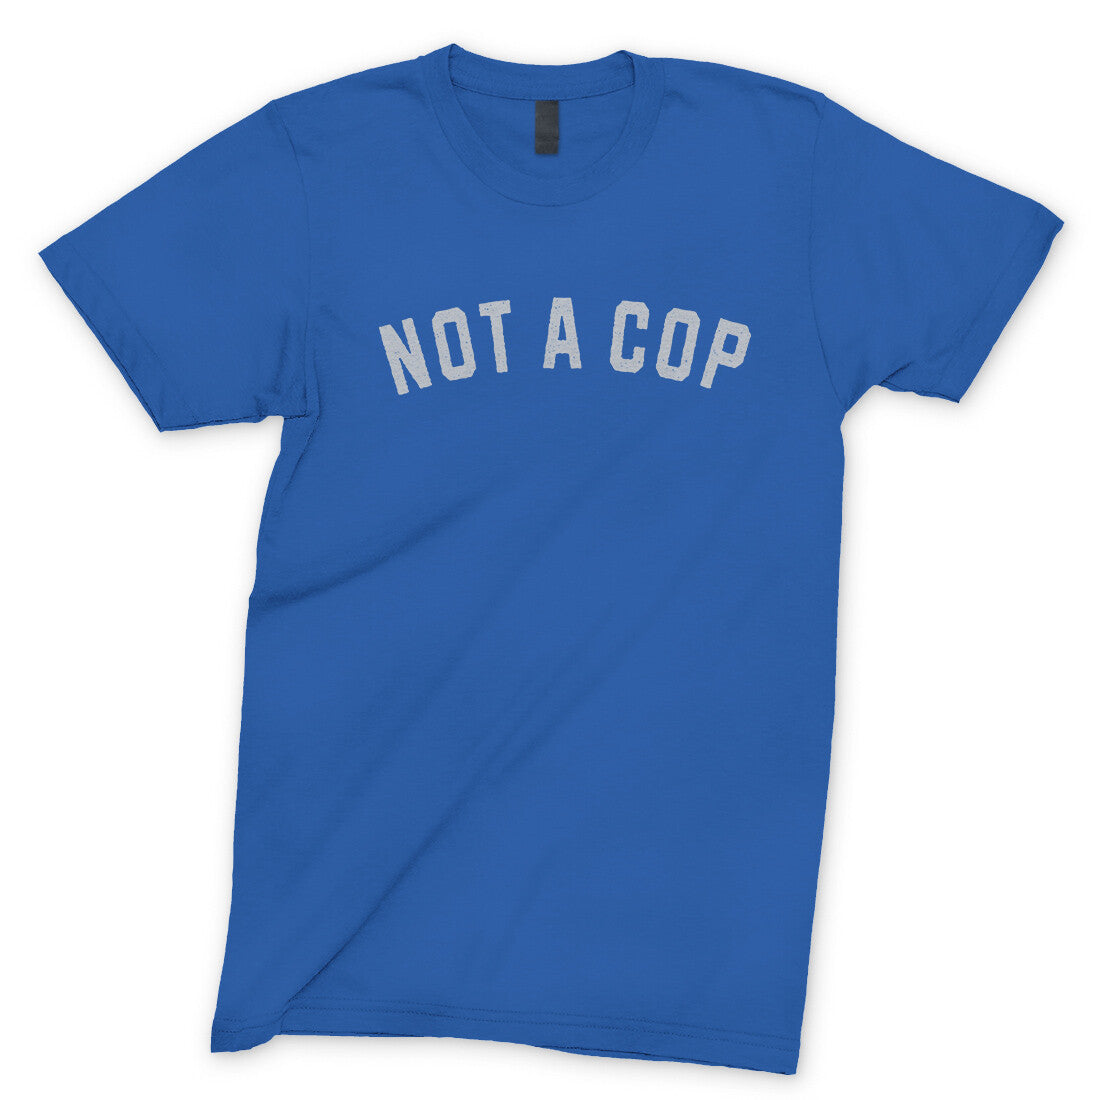 Not a Cop in Royal Color